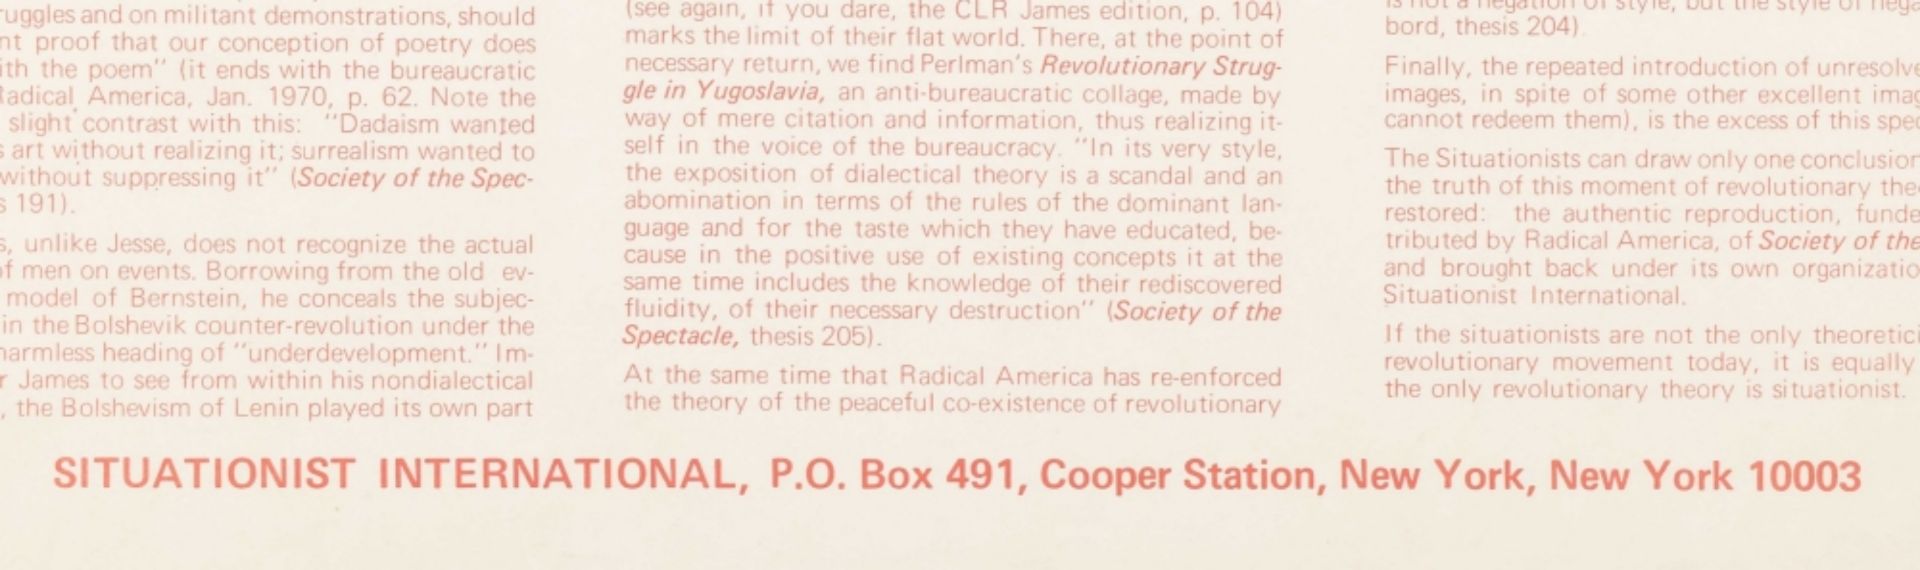 [Situationists] To Nonsubscribers of radical America - Image 2 of 4